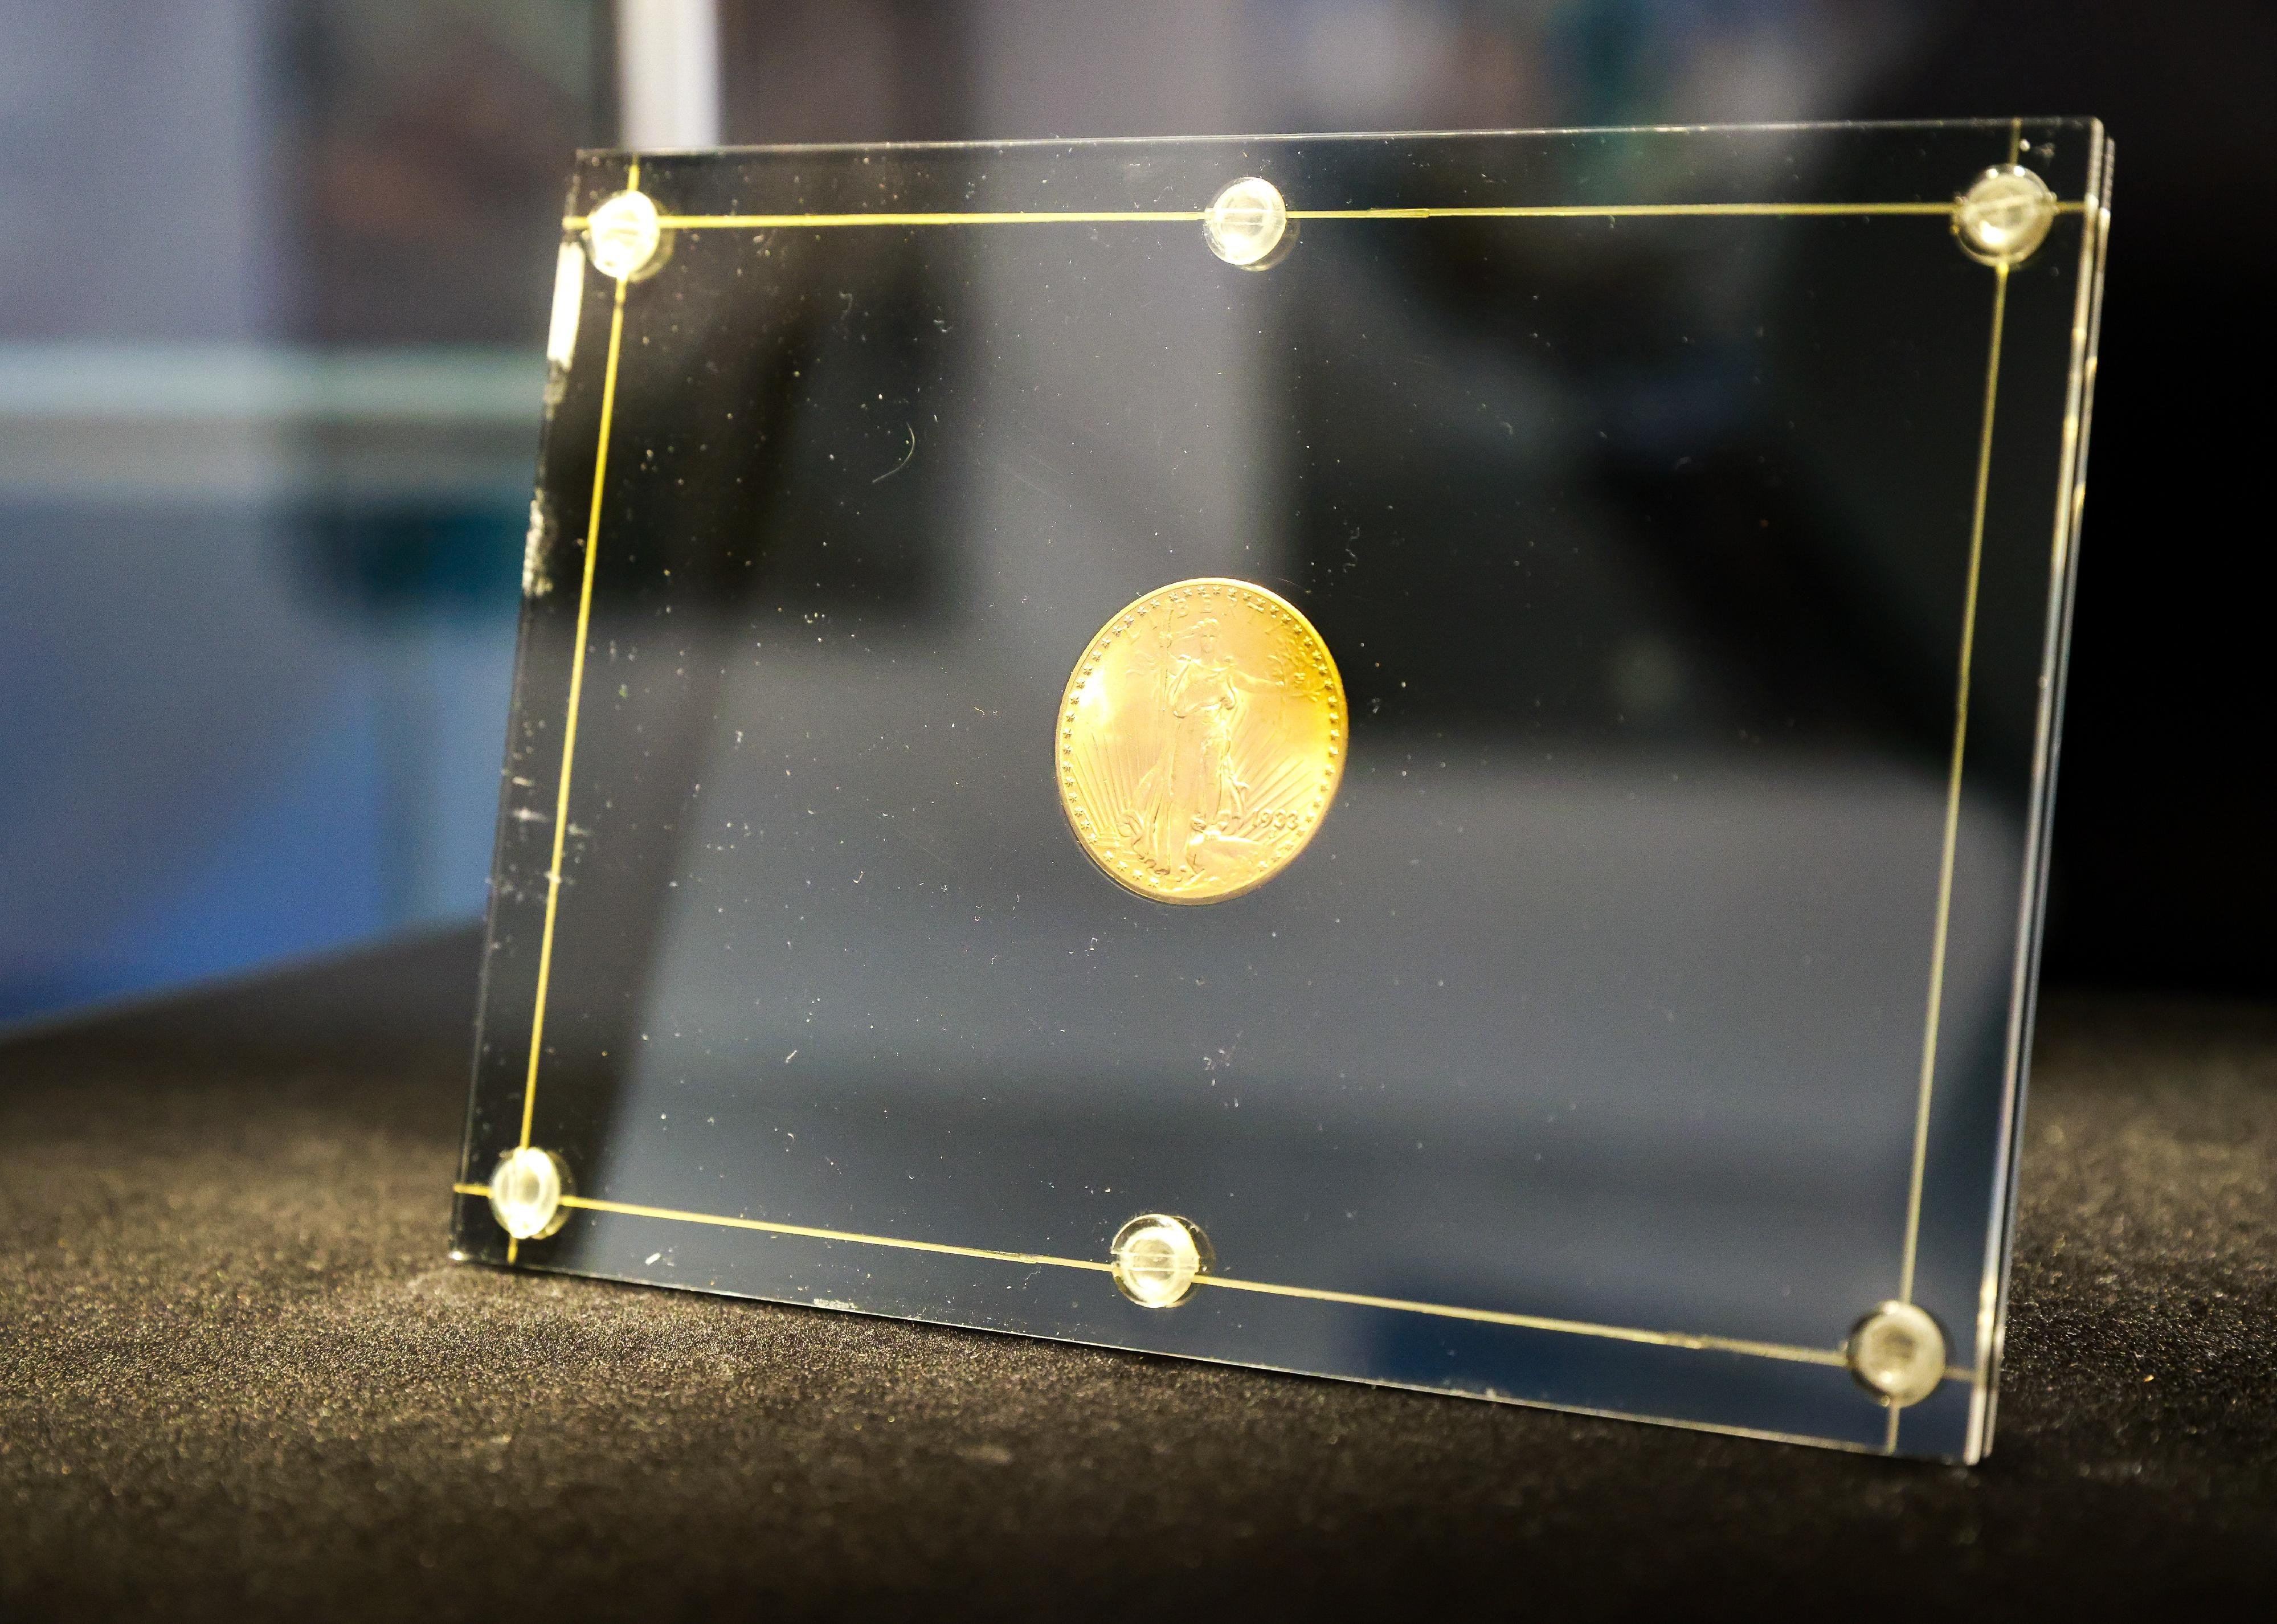 The only privately owned 1933 Double Eagle 20-dollar gold coin is on display in a black and glass case.